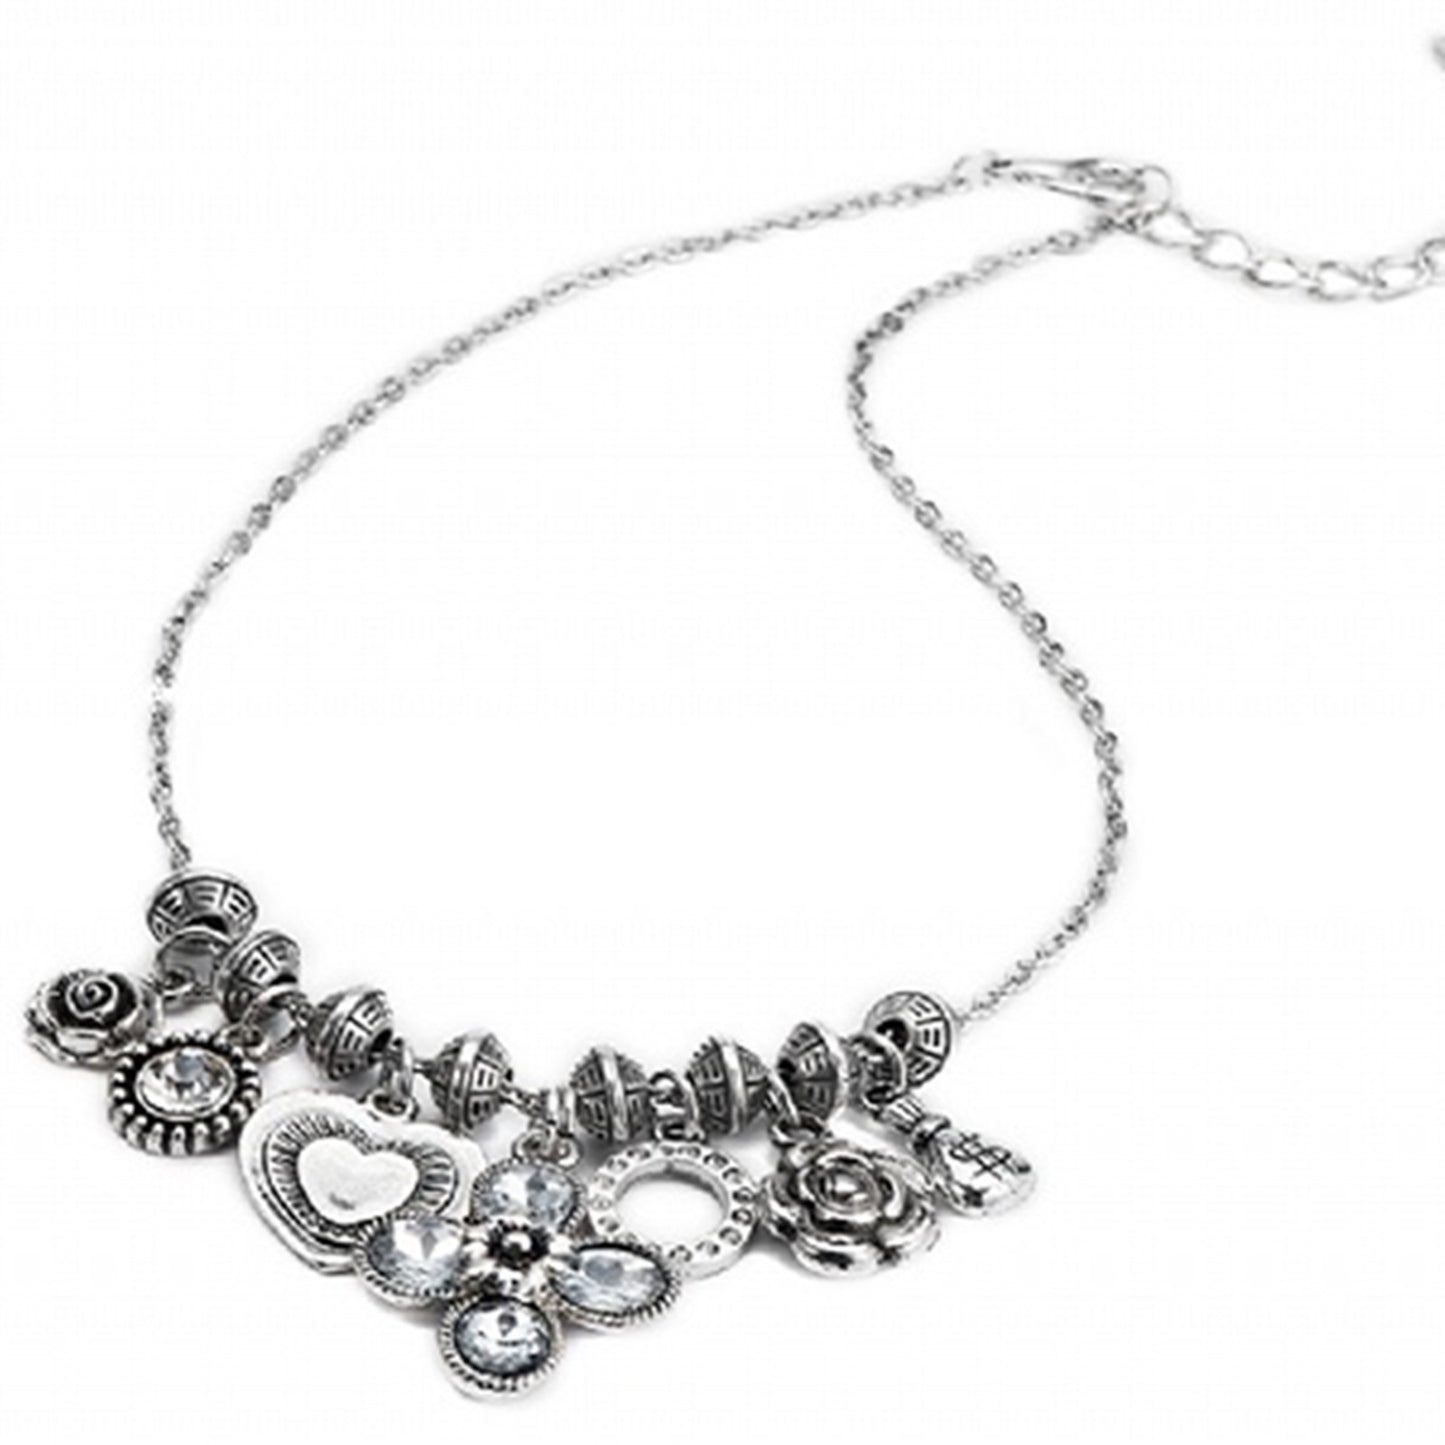 Flower and heart charm necklace in antique silver finish